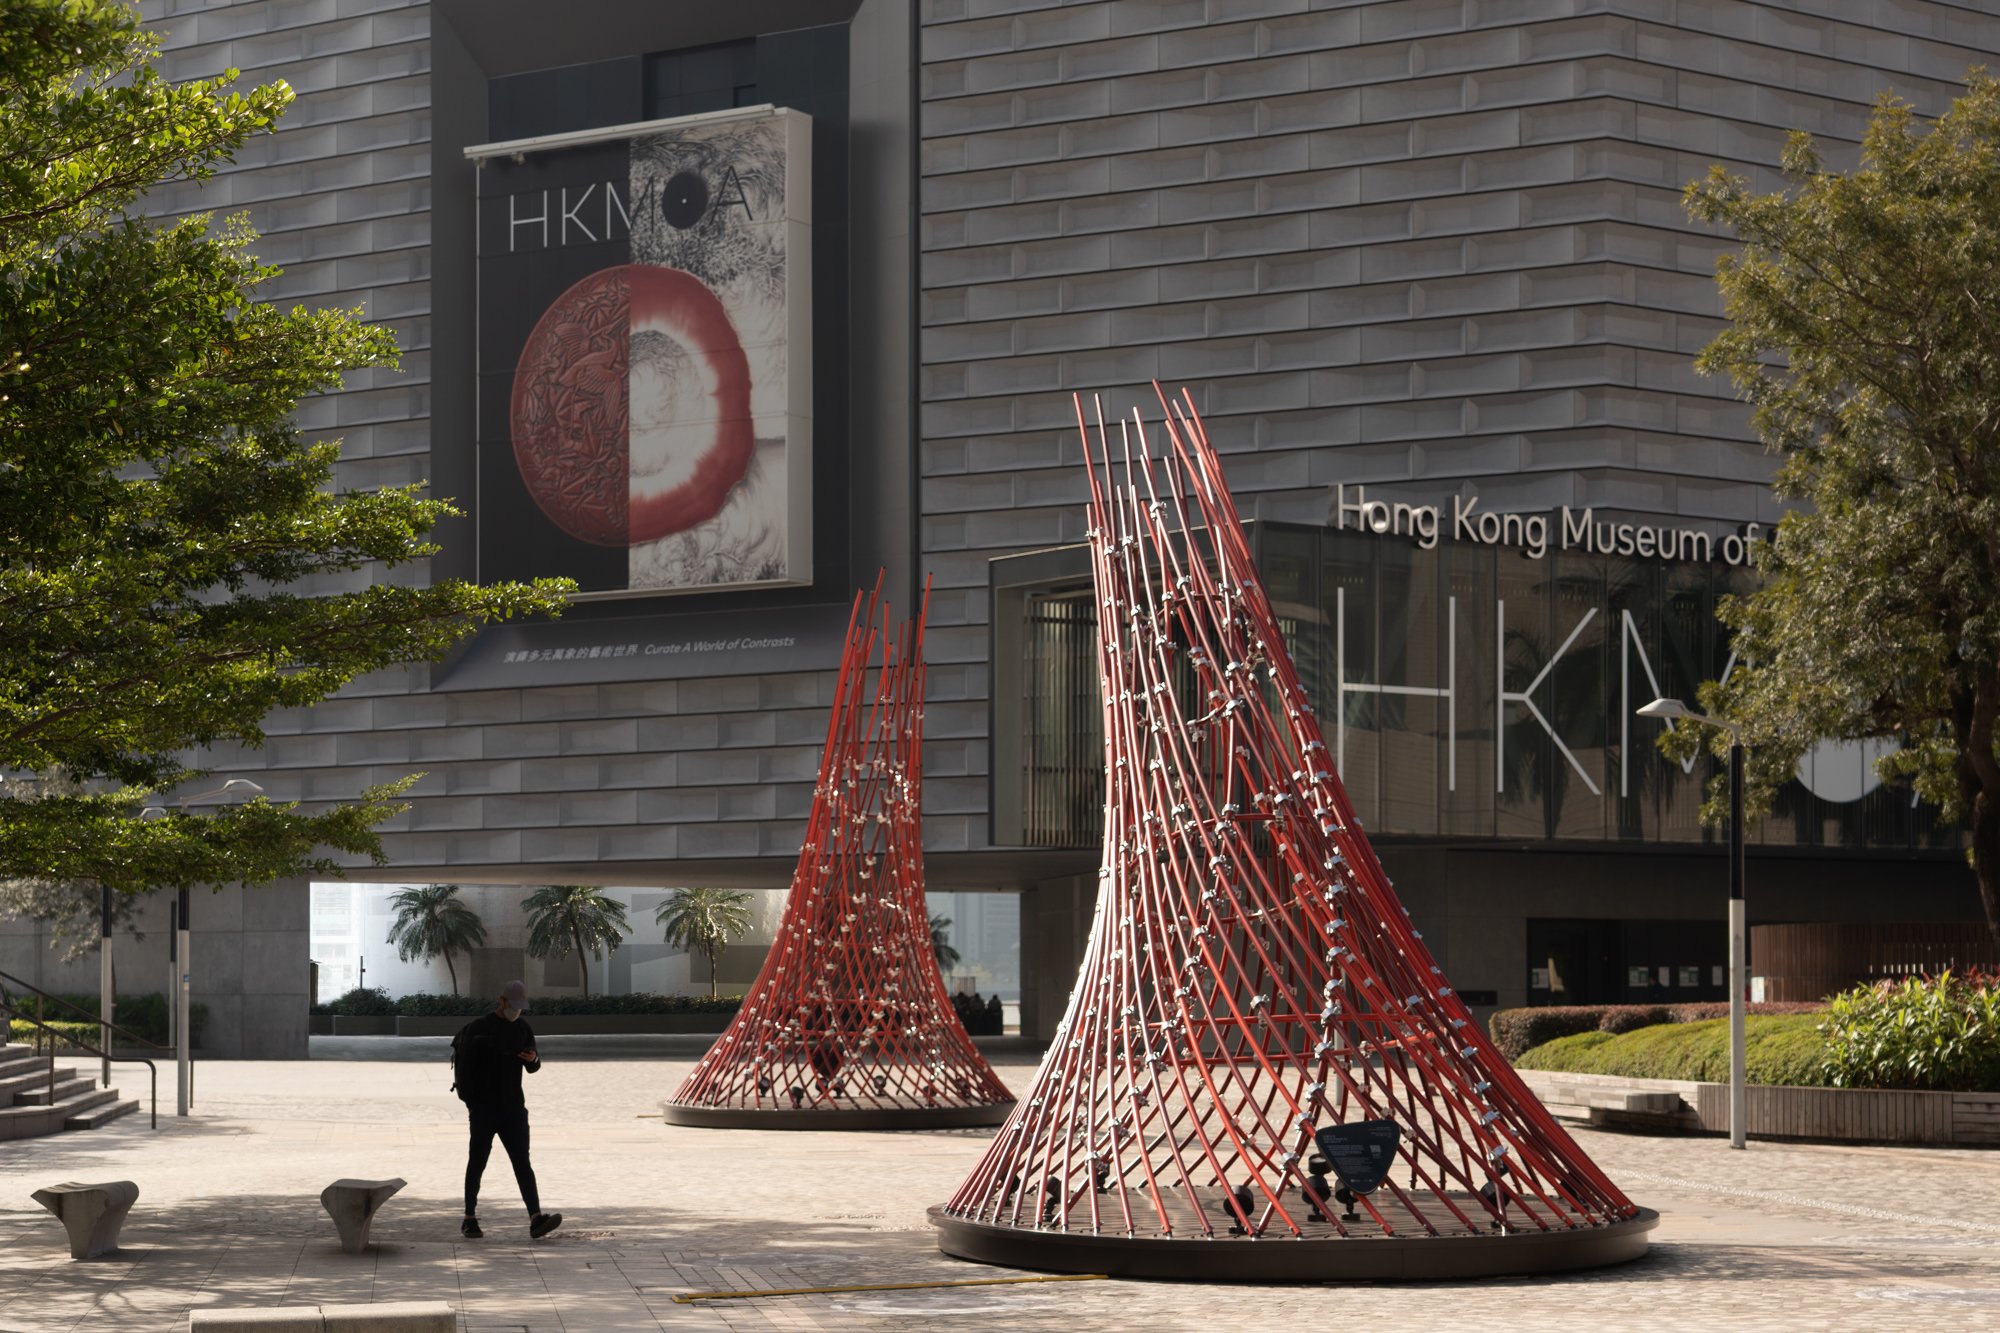  Resonance-In-Sight Hong Kong Museum of Art Designed by LEAD Hong Kong 